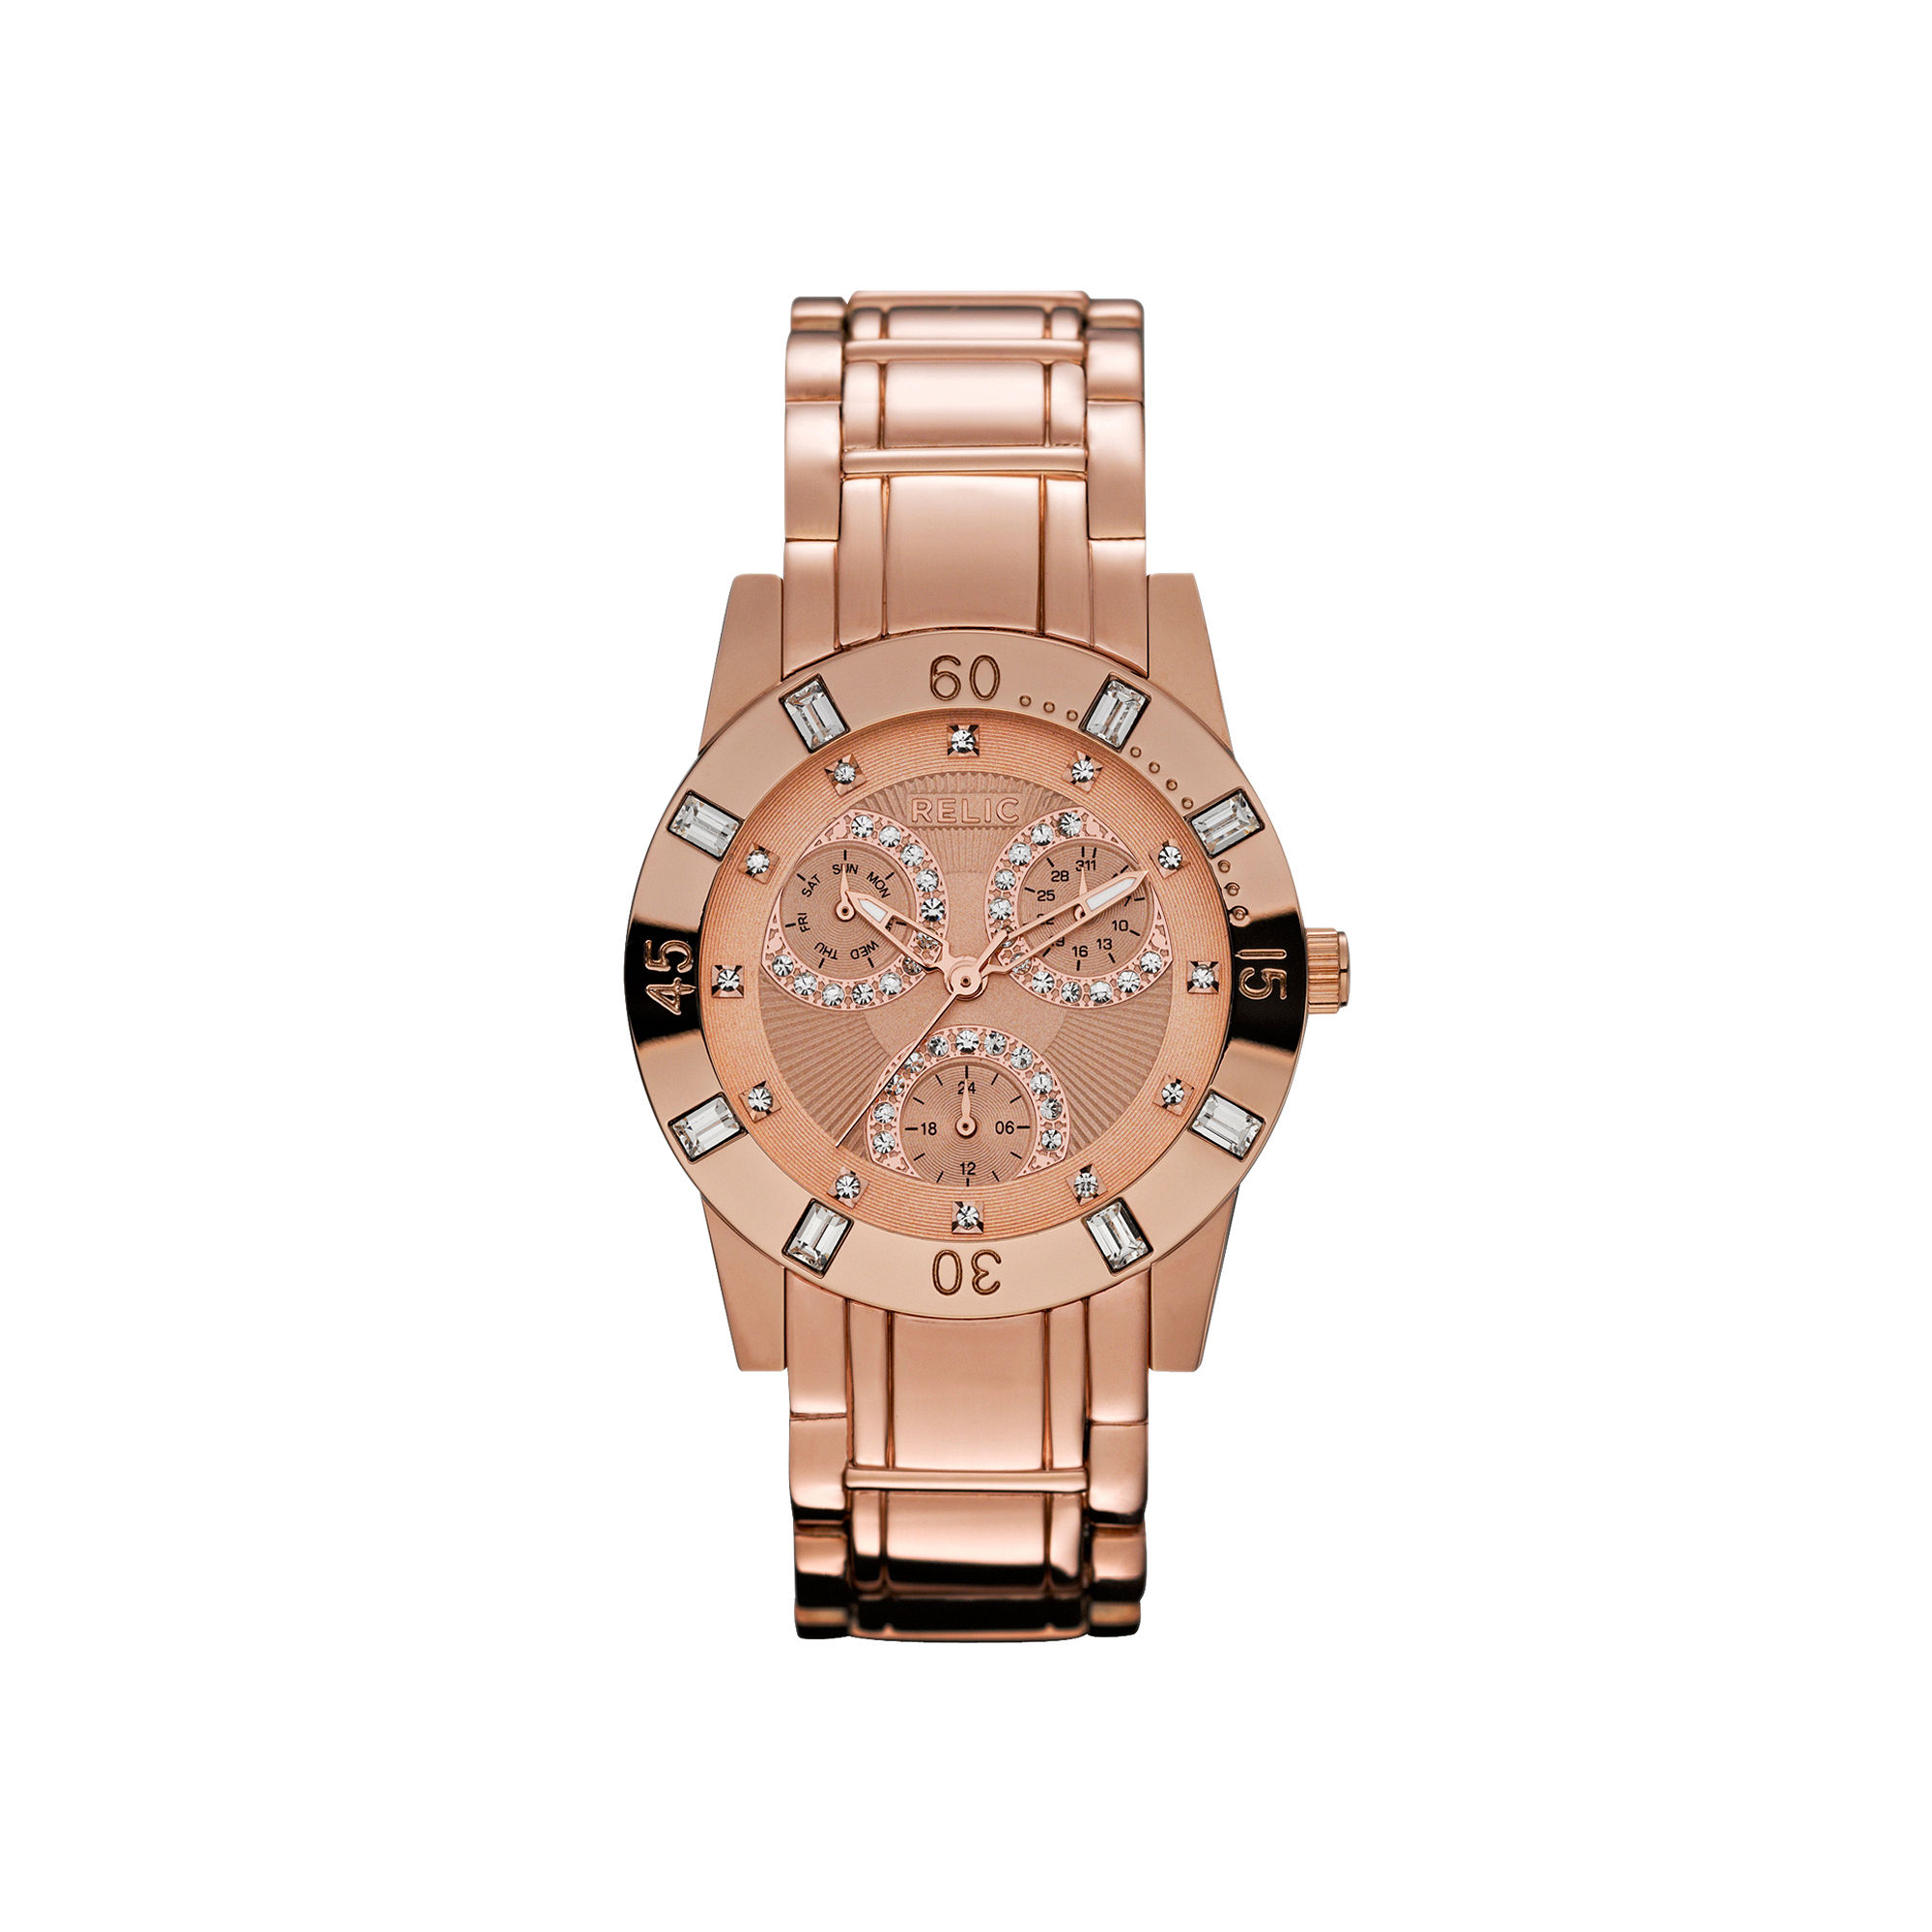 UPC 723765264813 product image for Relic Beth Womens Rose-Tone Crystal-Accent Multifunction Watch | upcitemdb.com